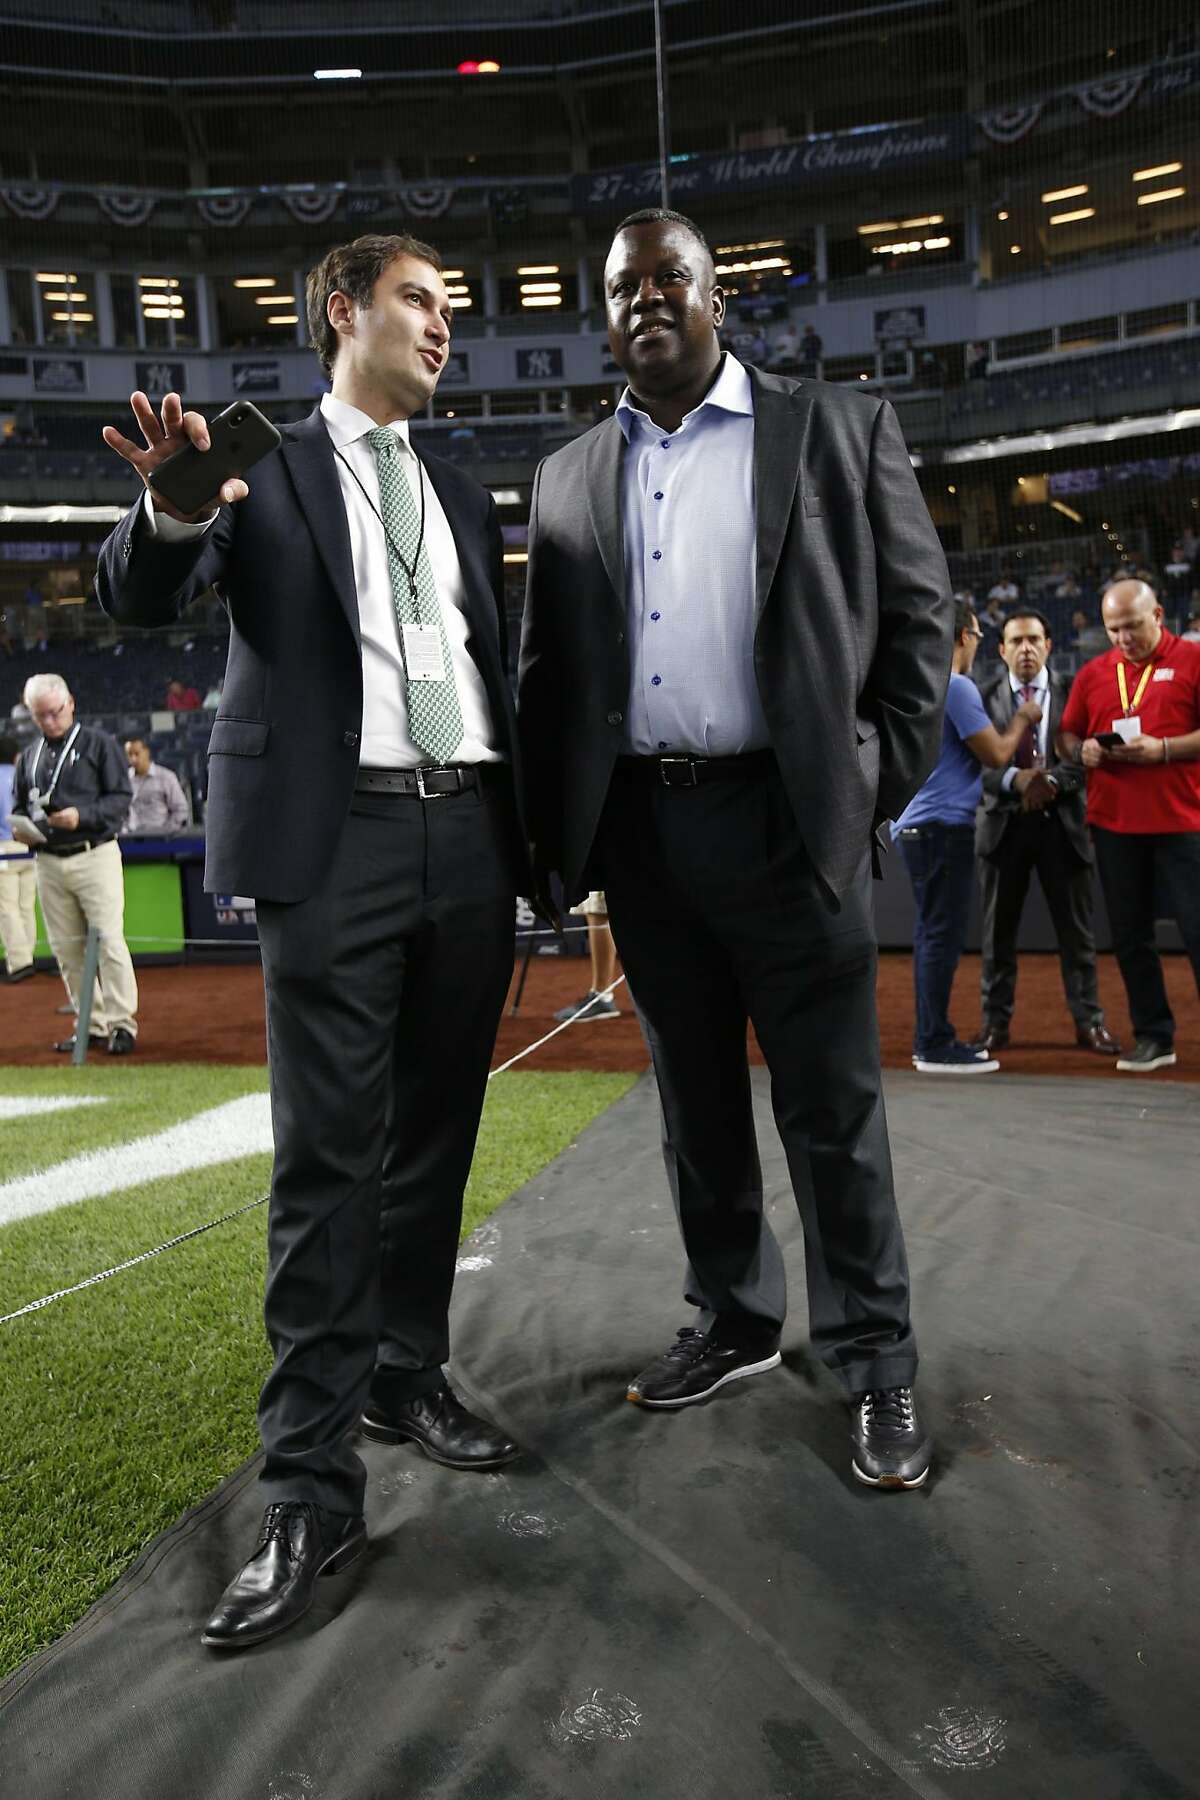 President David Kaval and Assistant General Manager/Director of Player Personnel Billy Owens of the Oakland Athletics talk on the field prior to the game against the New York Yankees in the American League Wild Card Game at Yankee Stadium on October 3, 2018 New York, New York. The Yankees defeated the Athletics 7-2.